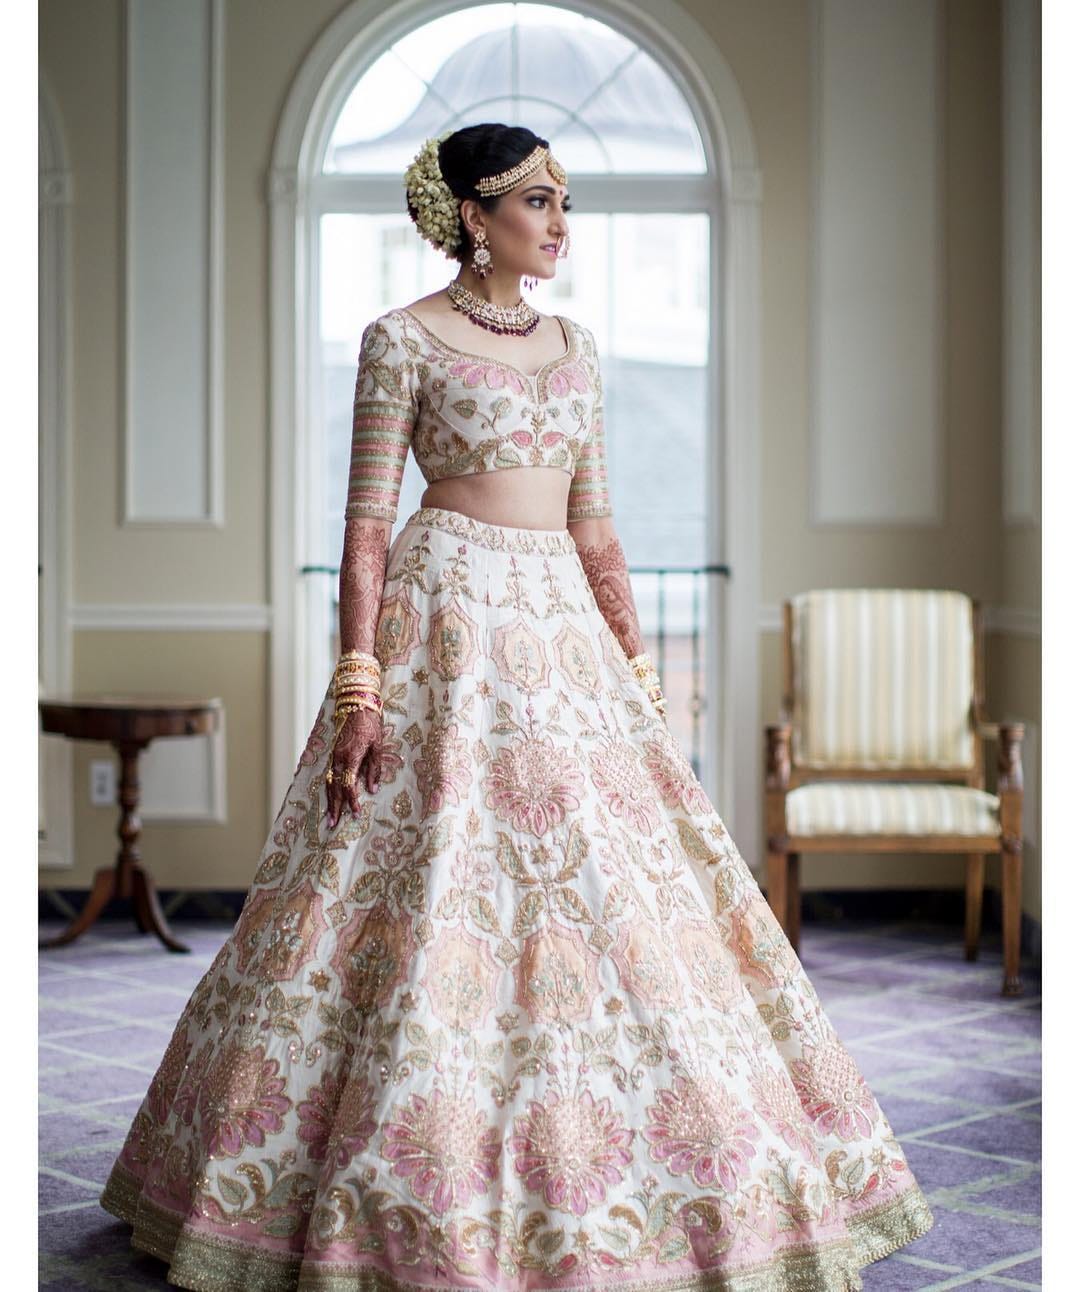 15 Indian Wedding Guest Outfit Ideas To Make A Statement This Wedding  Season | magicpin blog